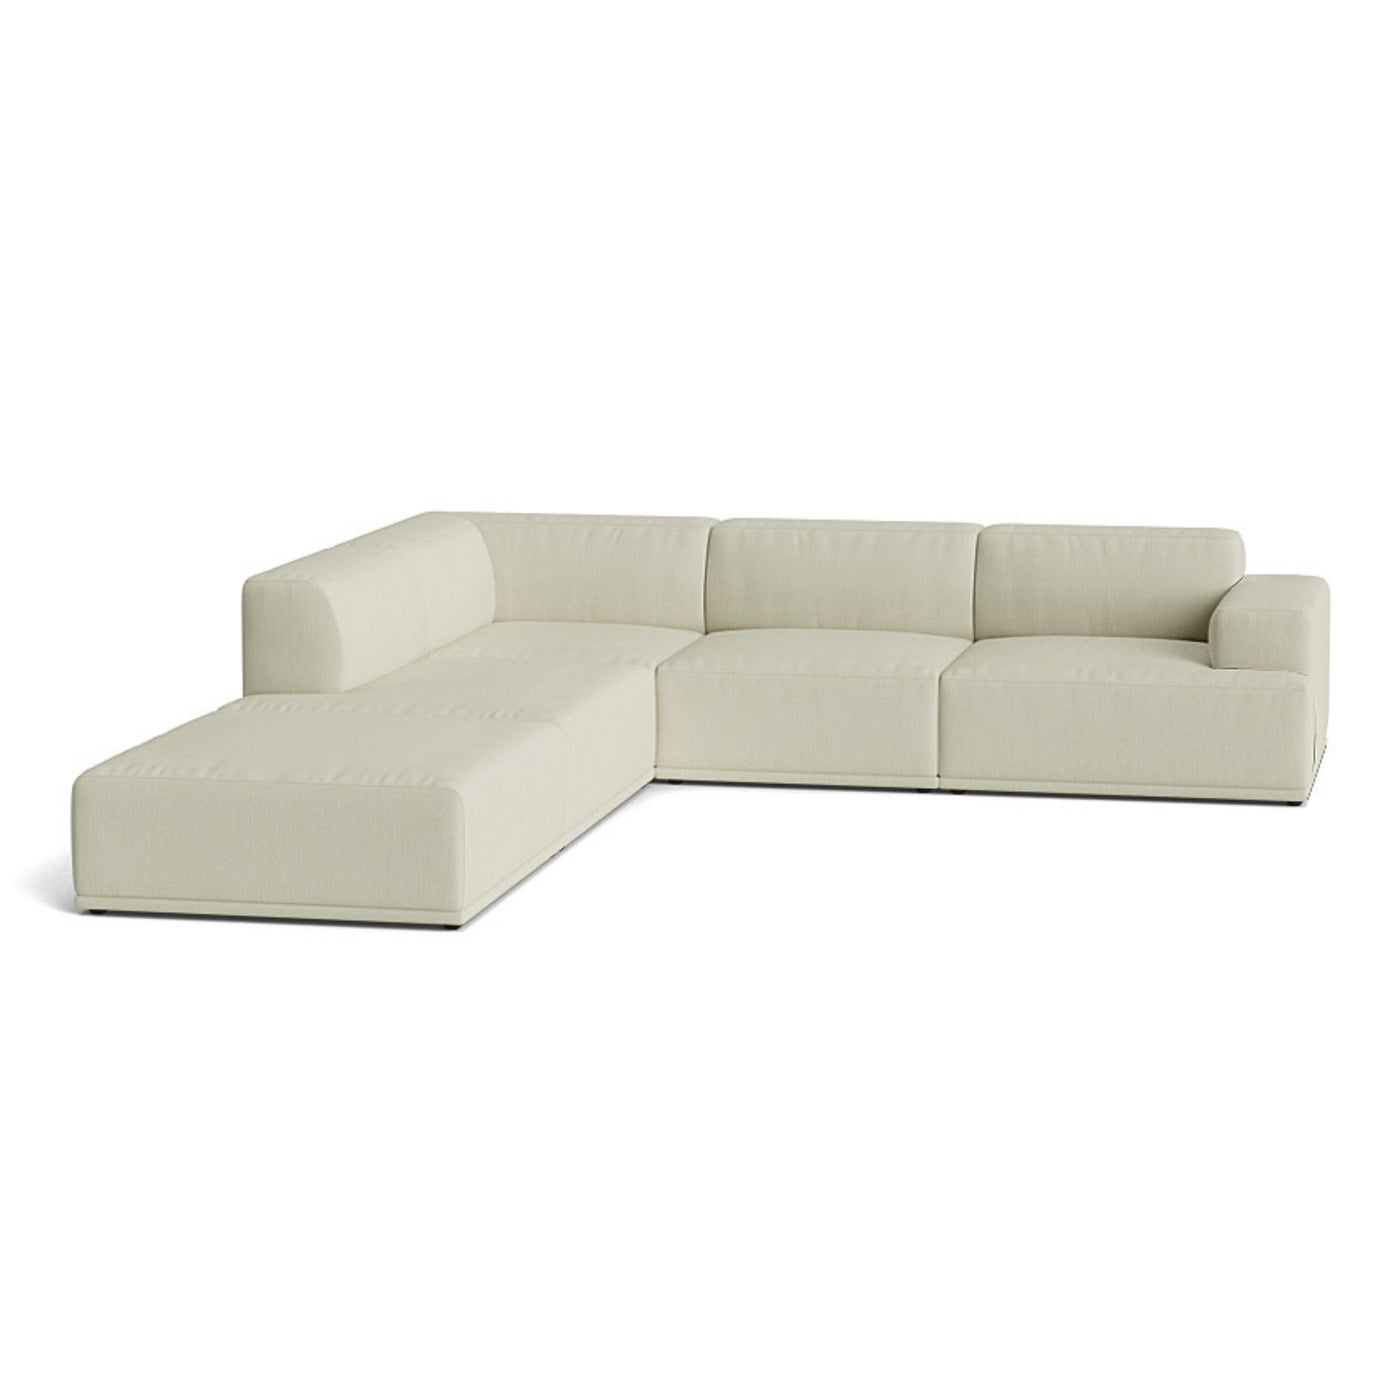 Muuto Connect Soft Modular Corner Sofa, configuration 1. Made-to-order from someday designs. #colour_balder-912